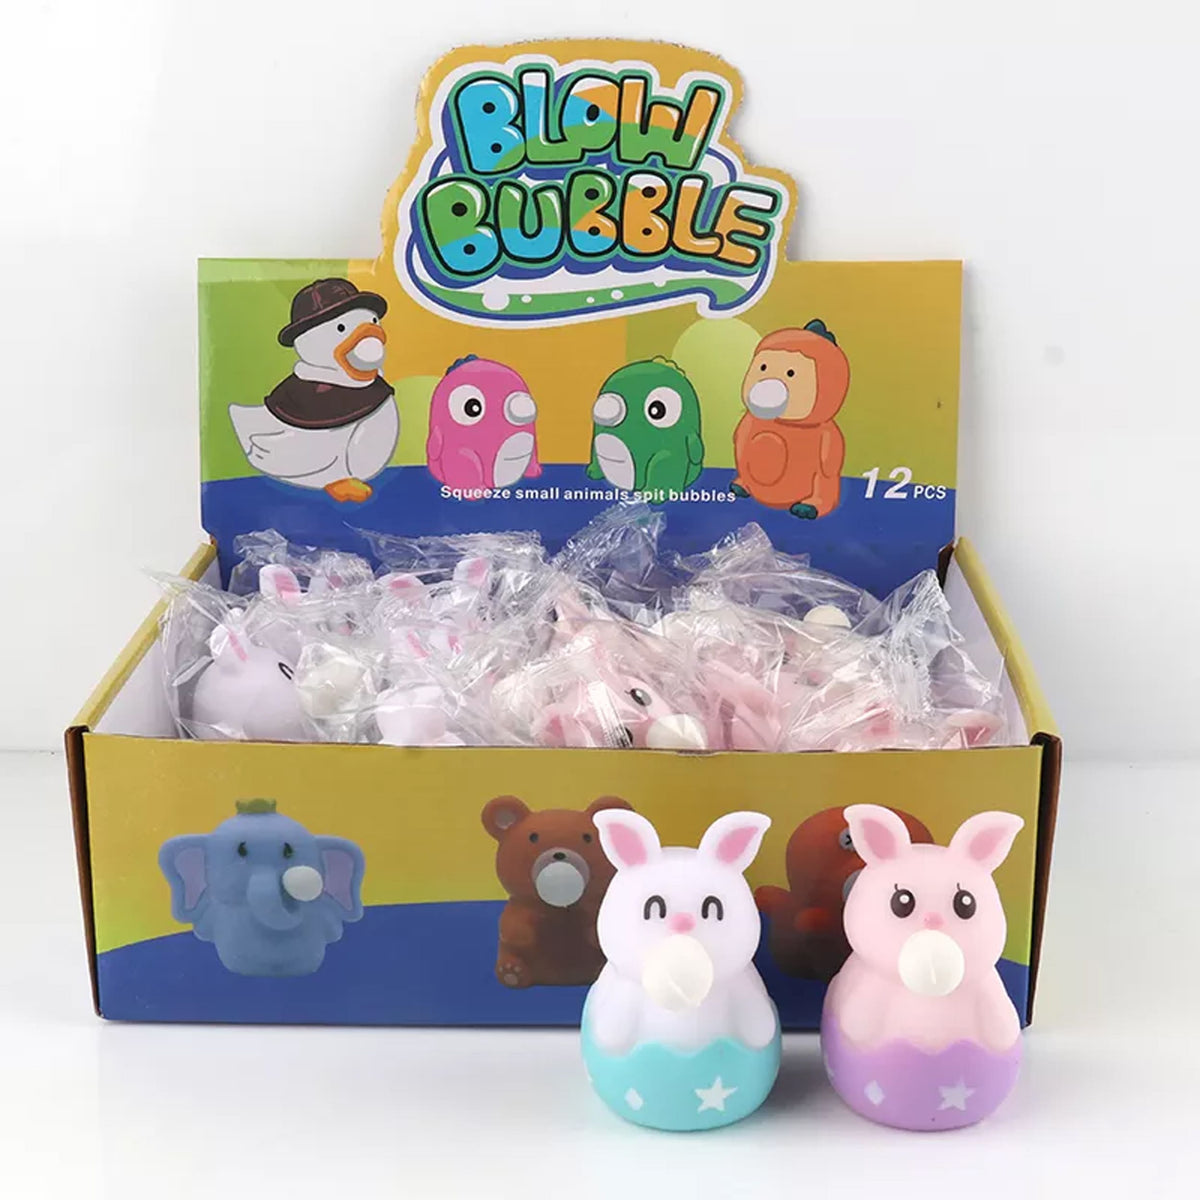 Magical Rabbit Blow Bubble Toy for Kids - Create Fun Memories